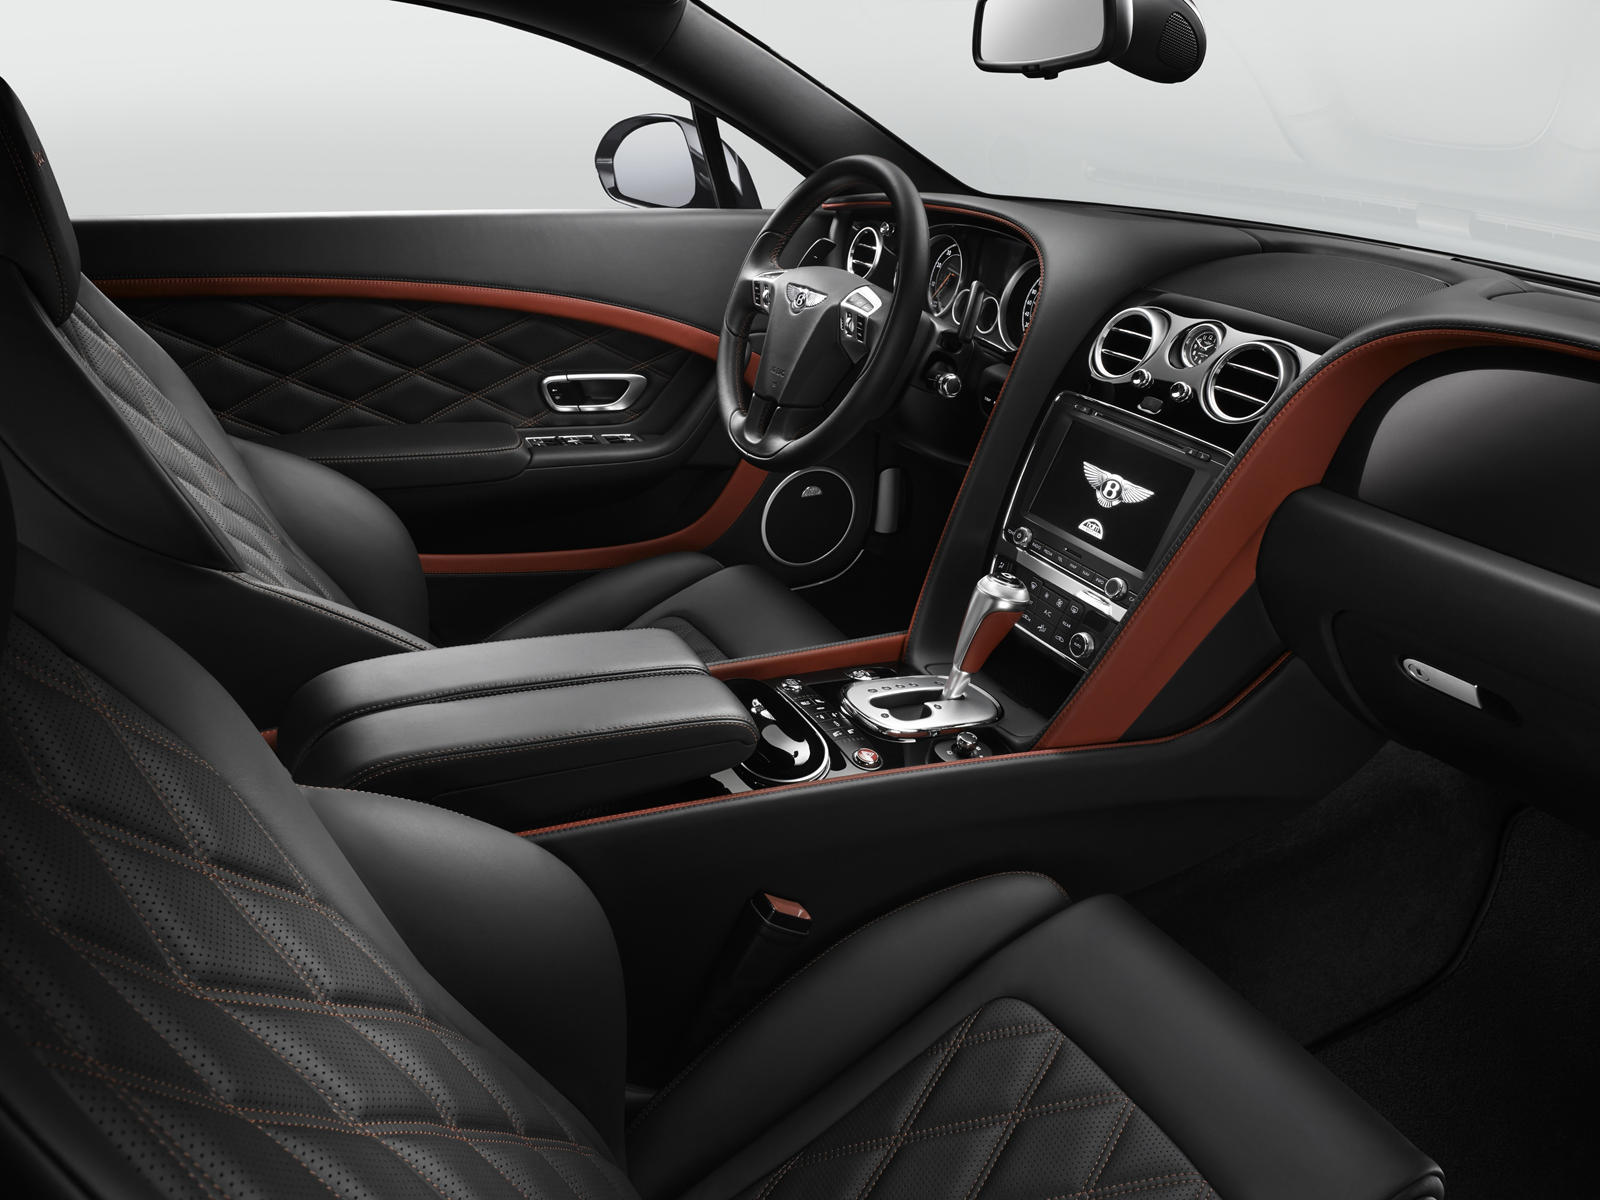 Bentley Continental GTC with Mulliner Driving Pack 2014 (14) - Oscar Jacobs